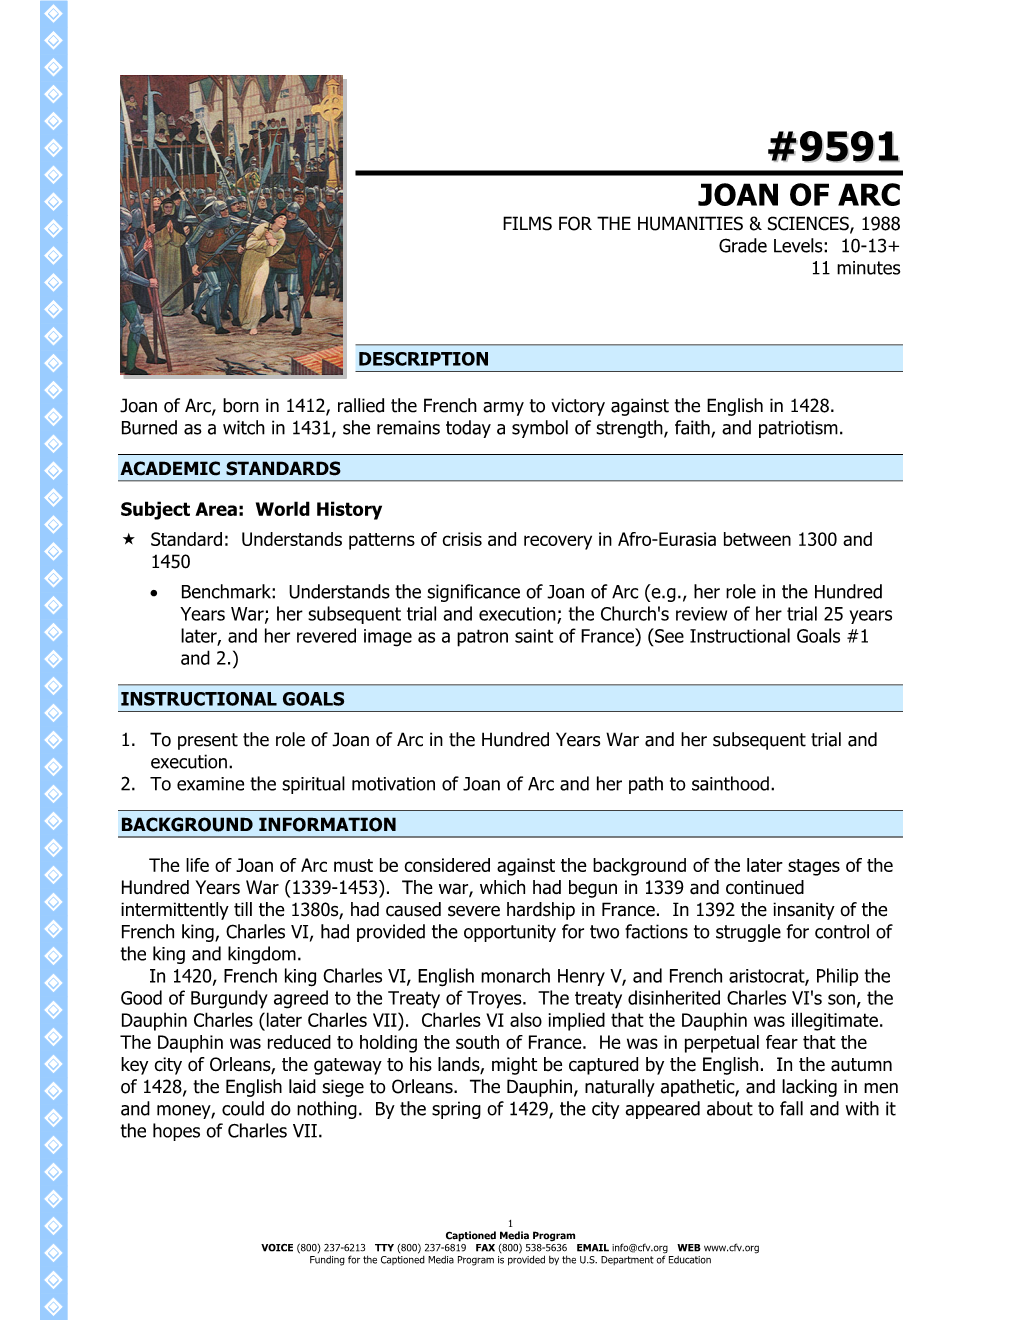 JOAN of ARC FILMS for the HUMANITIES & SCIENCES, 1988 Grade Levels: 10-13+ 11 Minutes